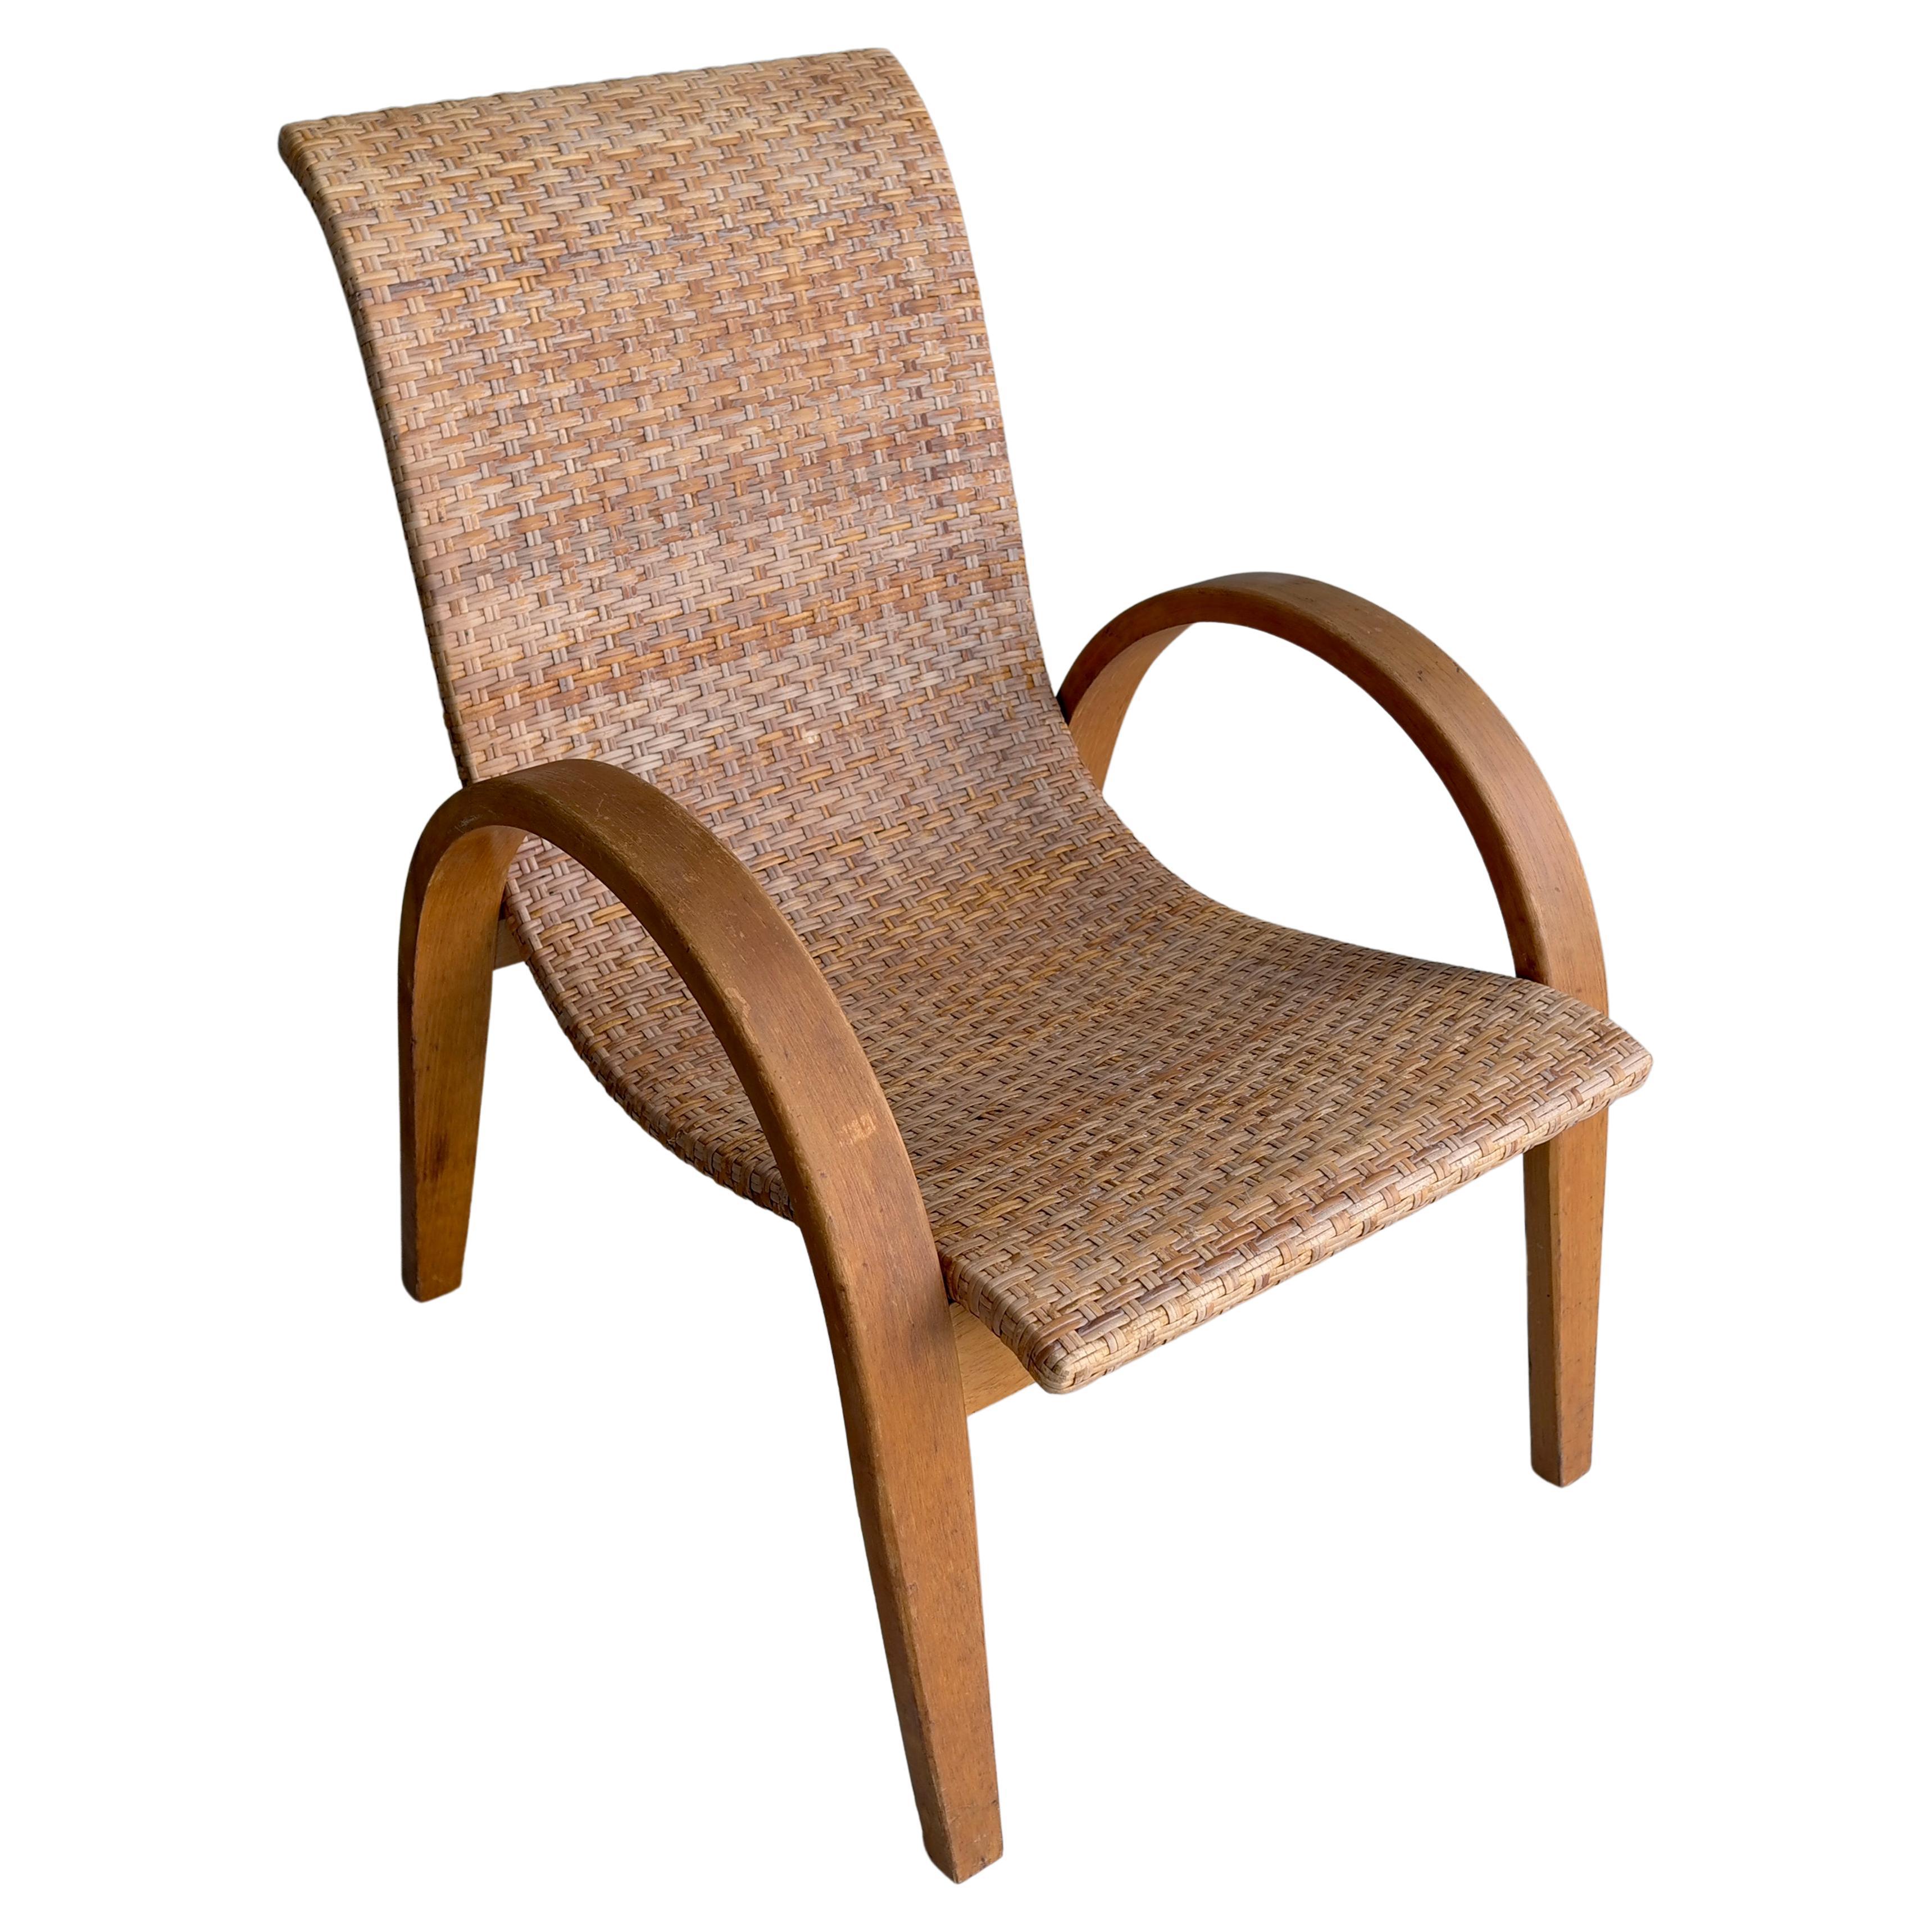 Sculptural Mid-Century Modern Armchair in Wood and Cane, 1950's For Sale